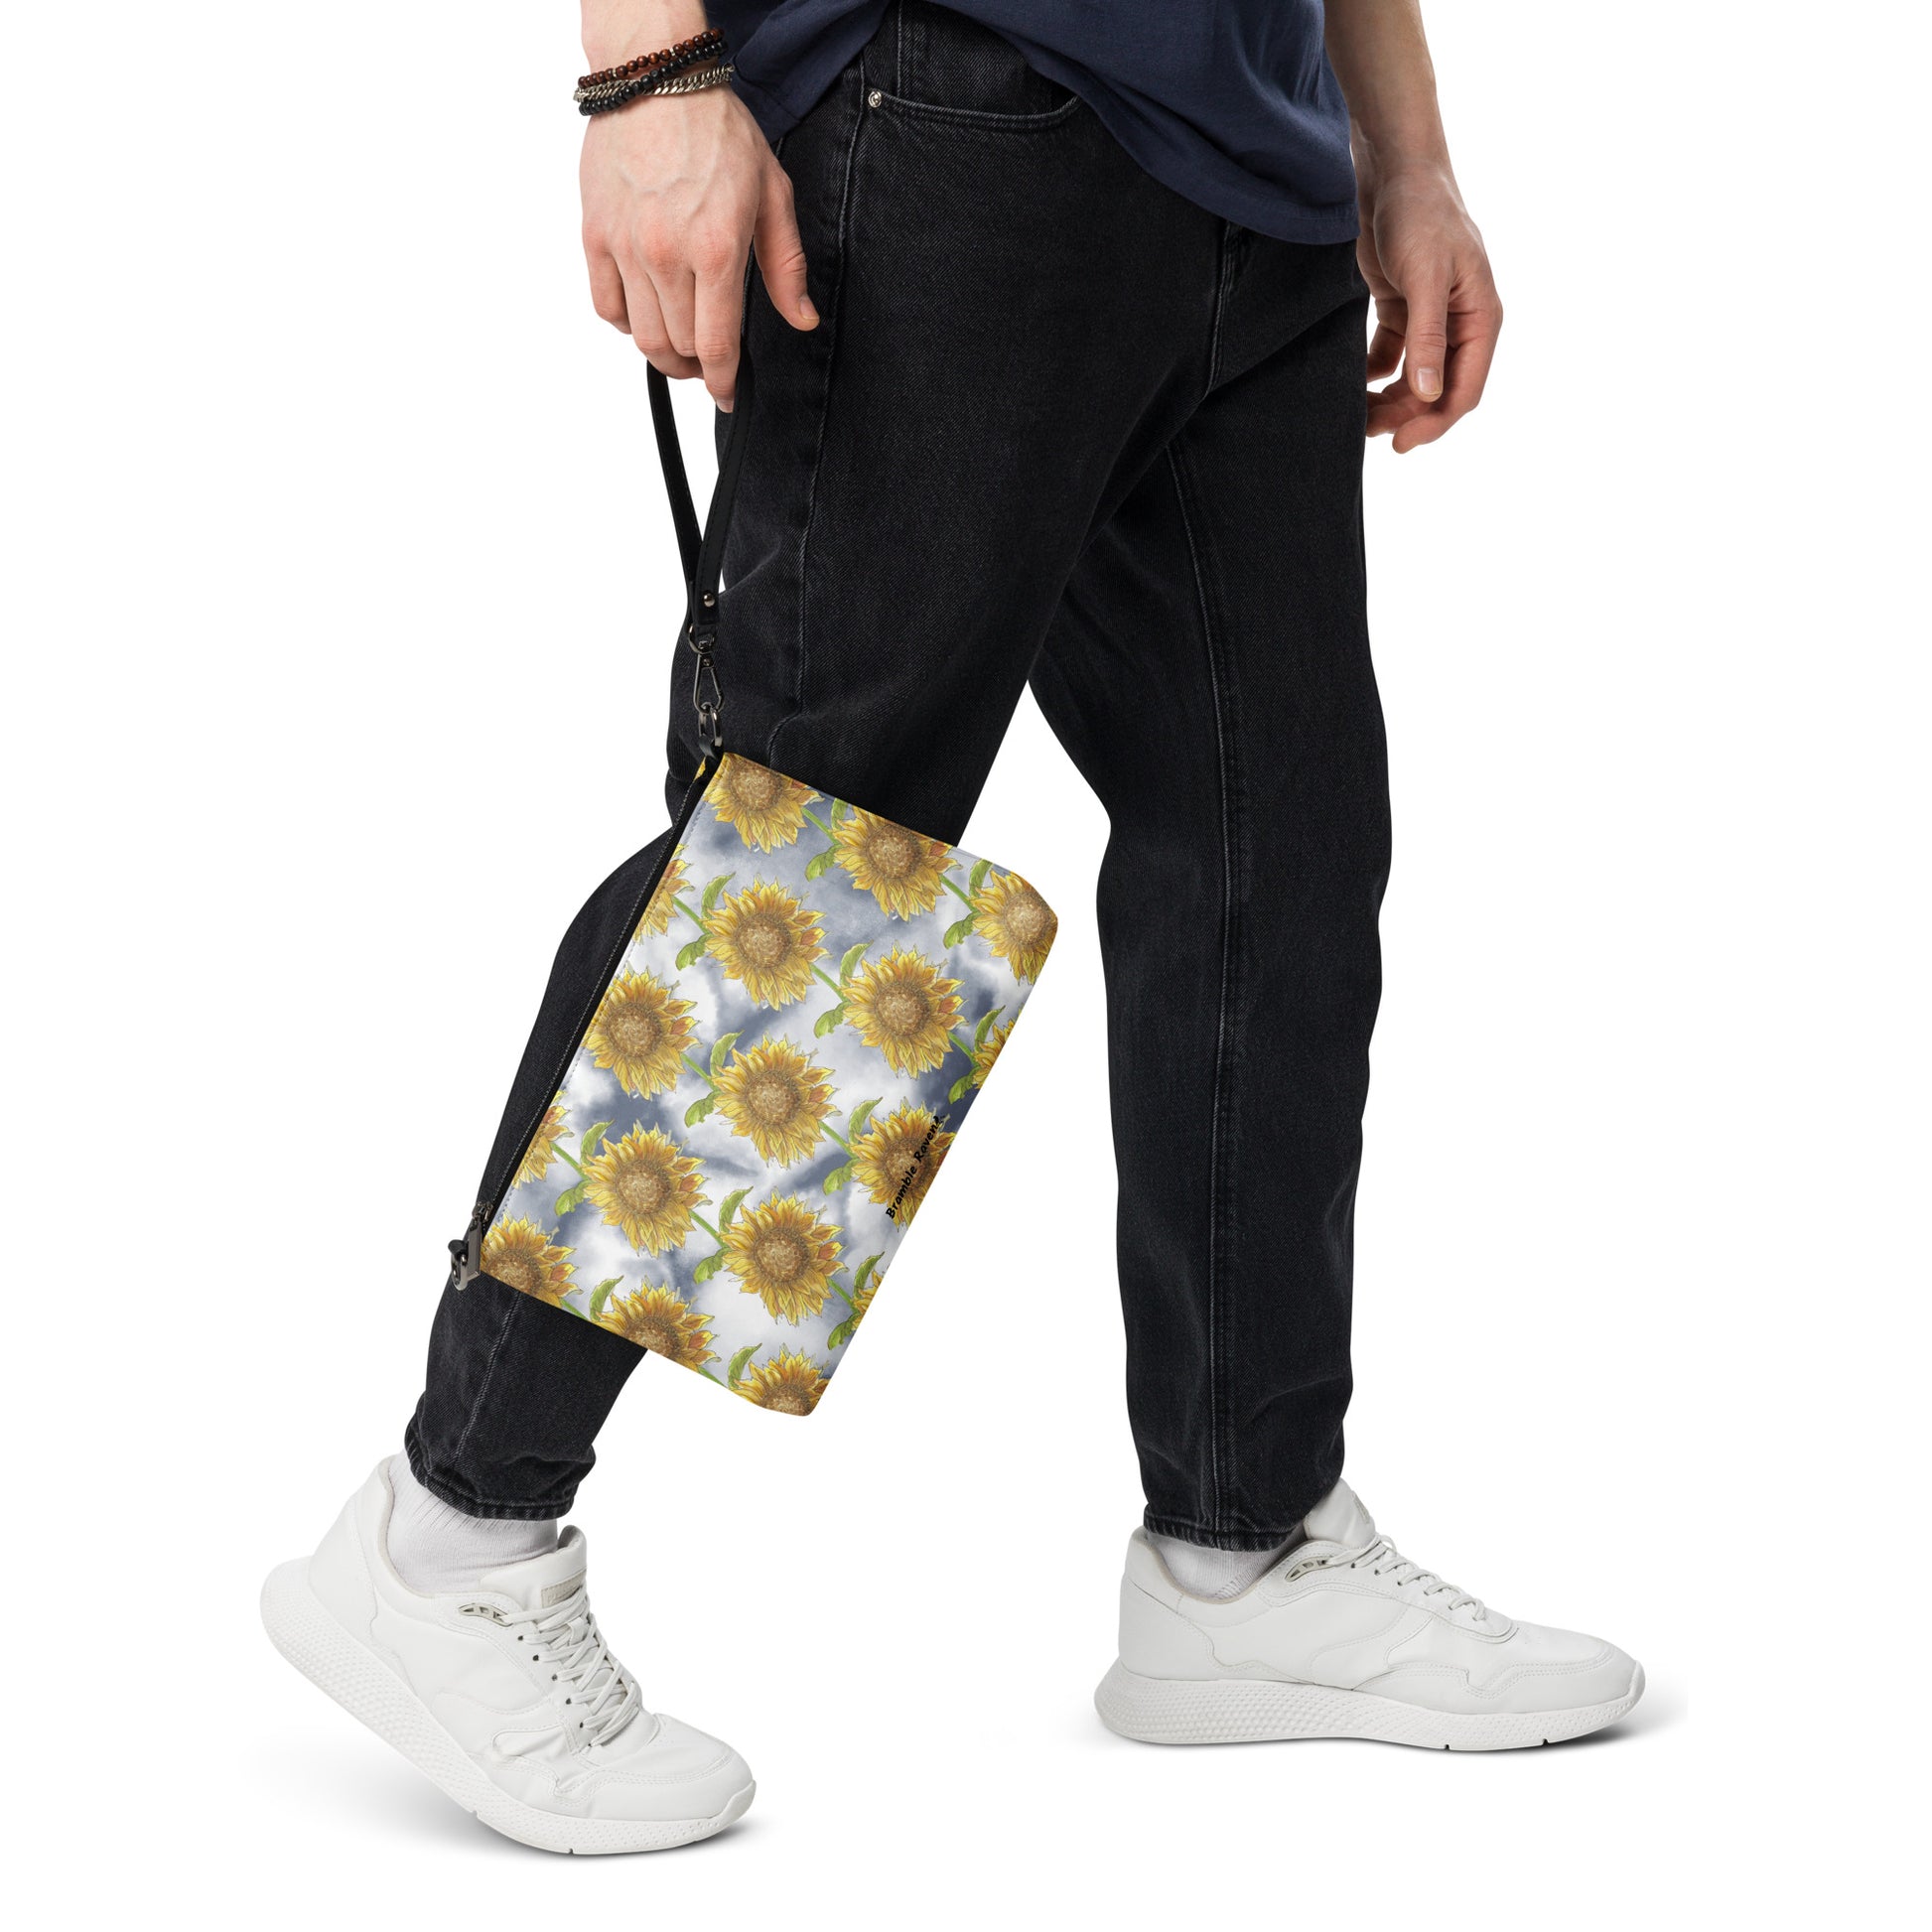 Sunflower crossbody bag. Faux leather with polyester lining and dark grey hardware. Comes with adjustable removable wrist and shoulder straps. Features patterned design of watercolor sunflowers against a cloudy background. Shown being held by wrist strap by model.